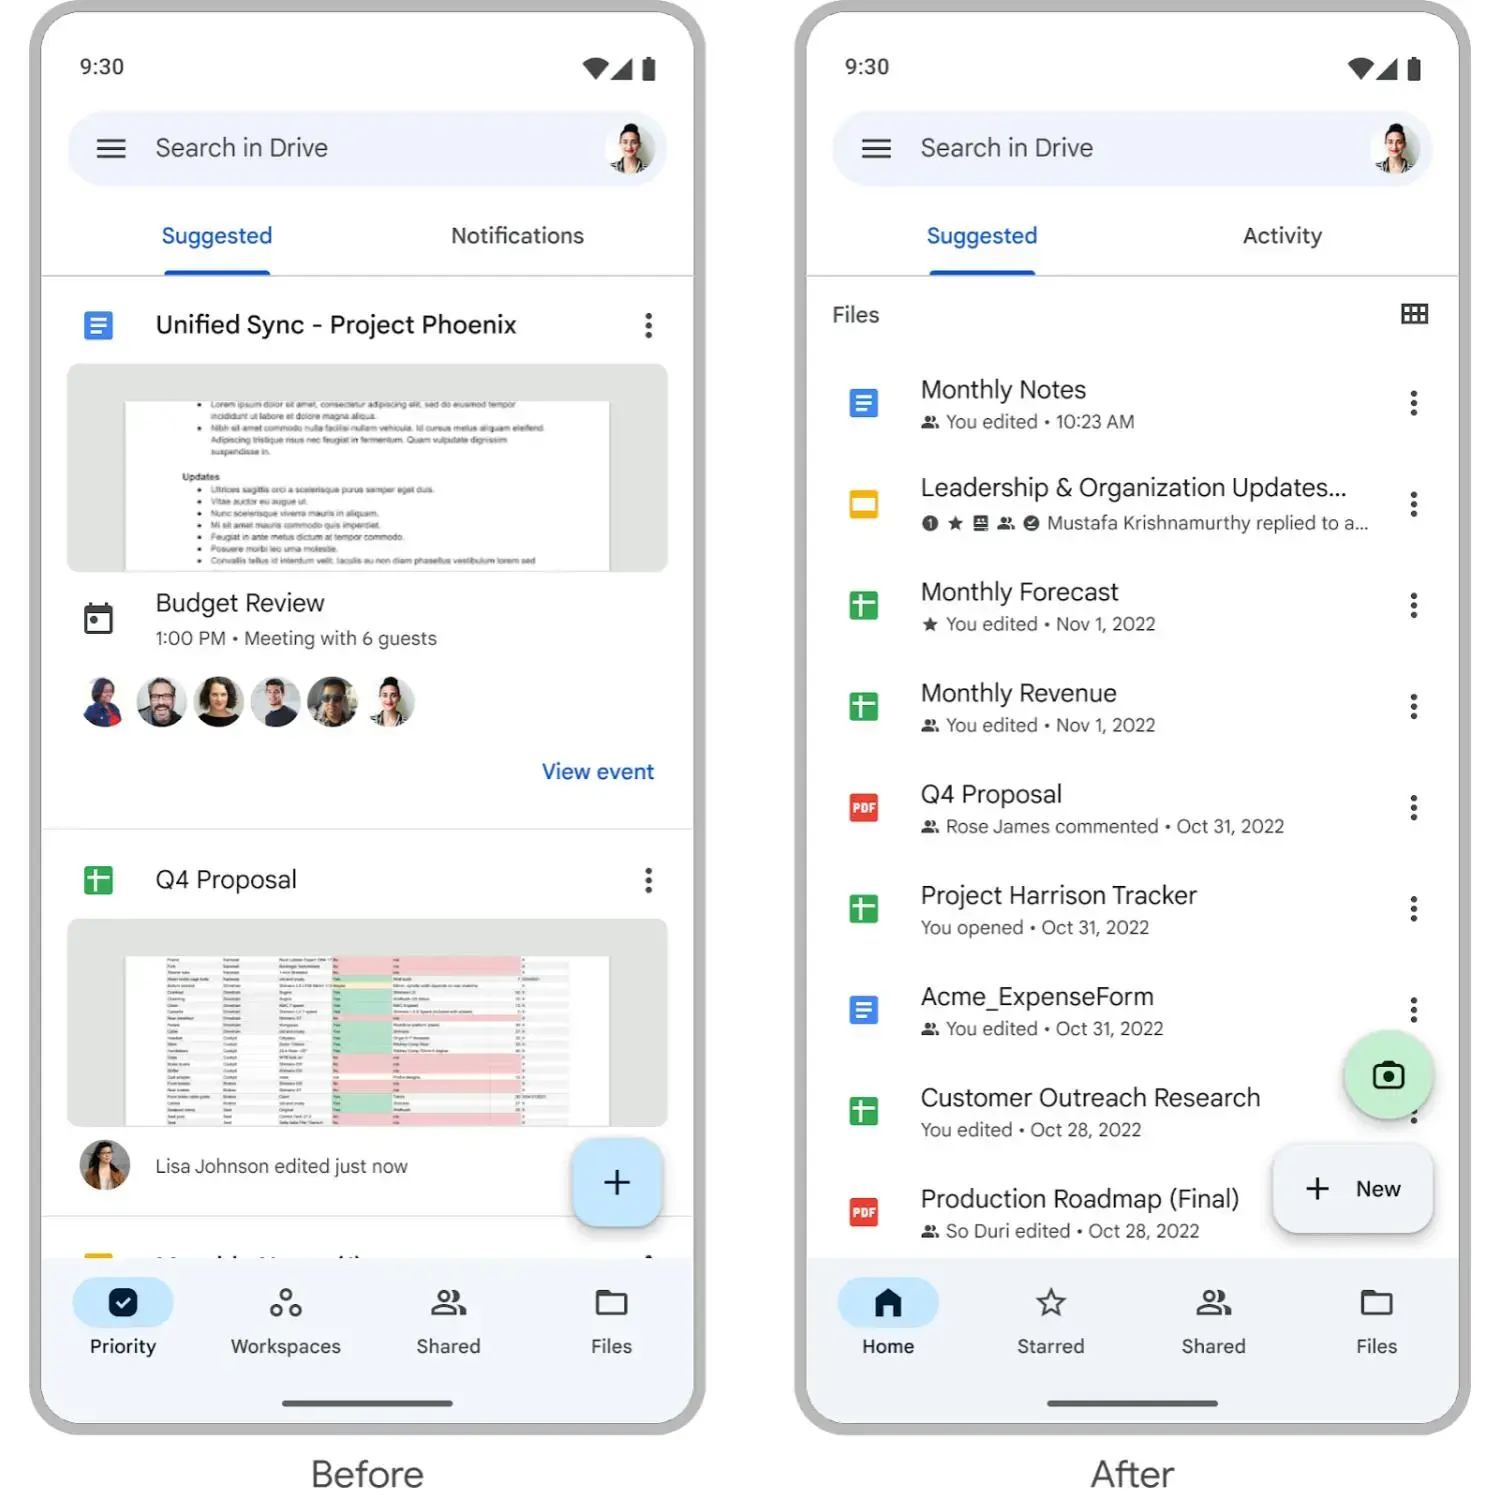 (Image Source - 9to5Google) The homepage before and after the new update - Google Drive gets a revamped homepage for Android and iOS users